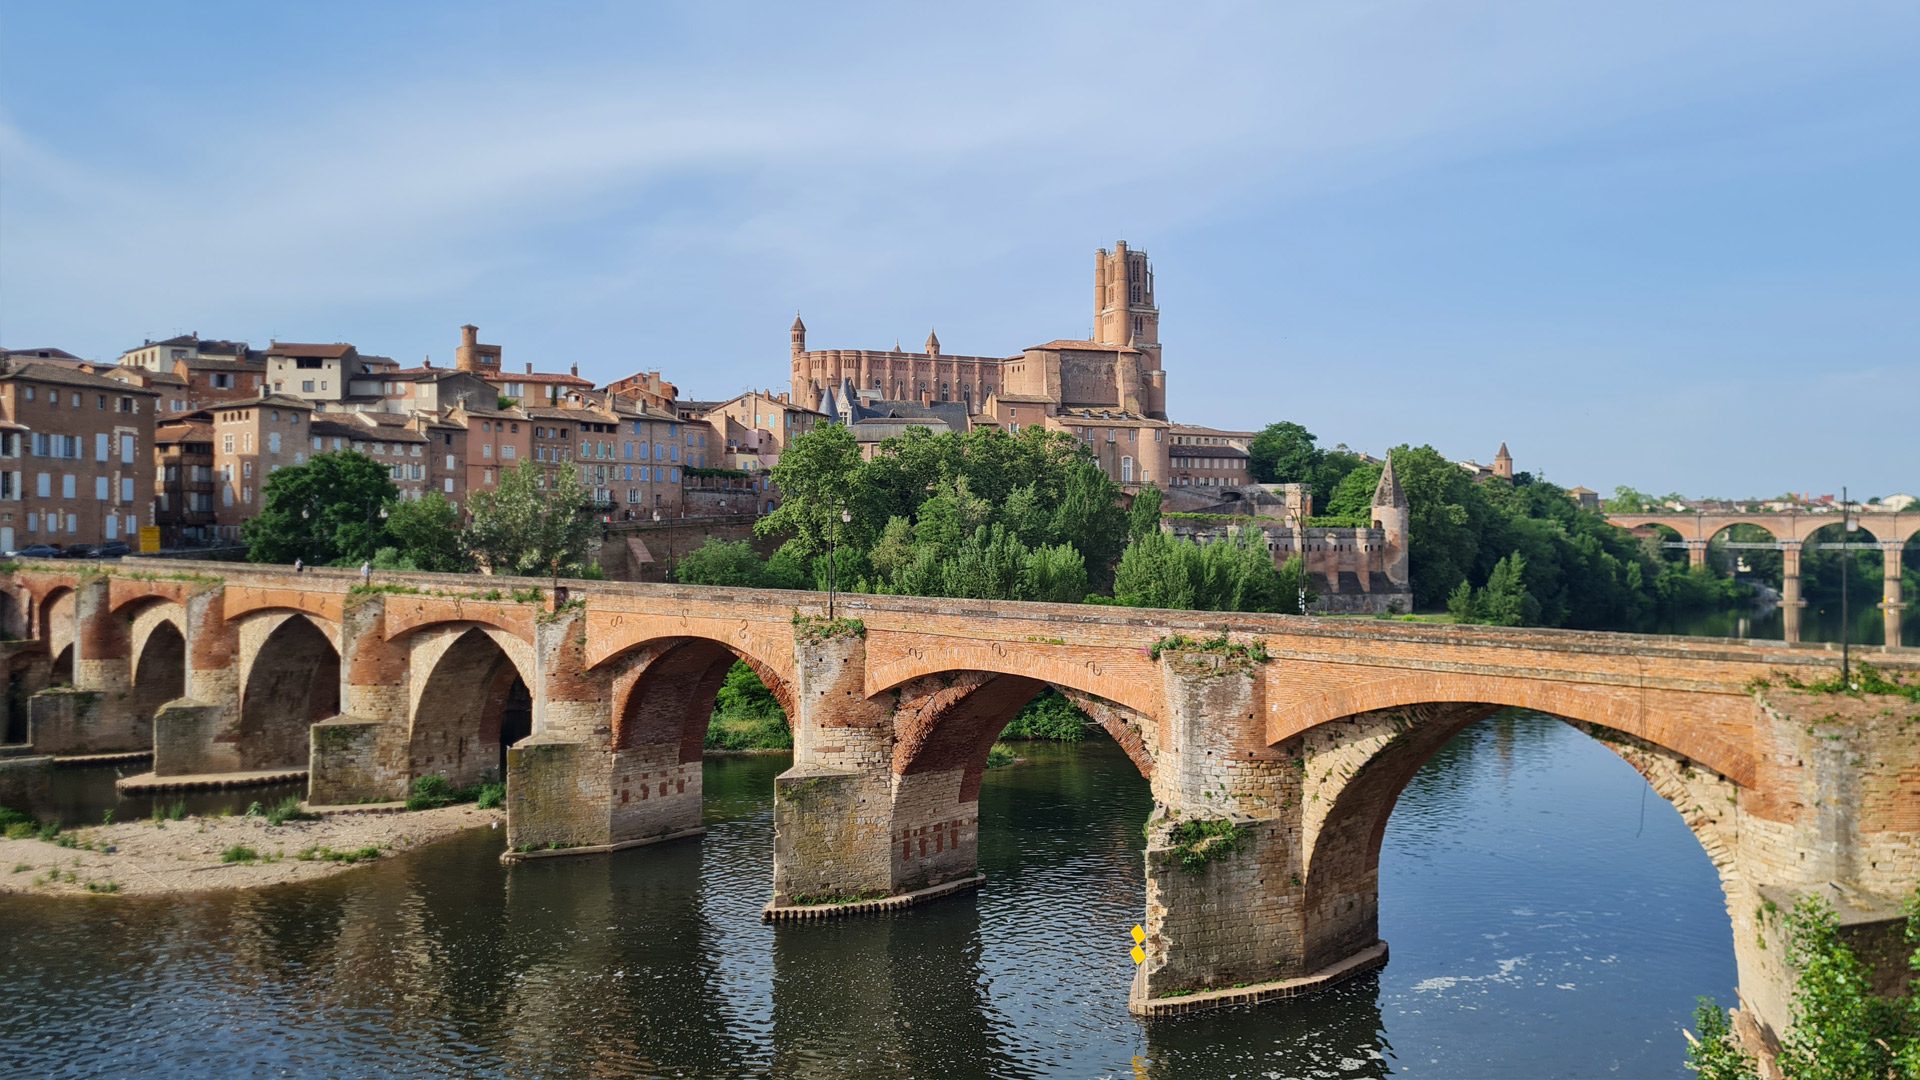 Albi, the old bridge - panoramic view of the episcopal group